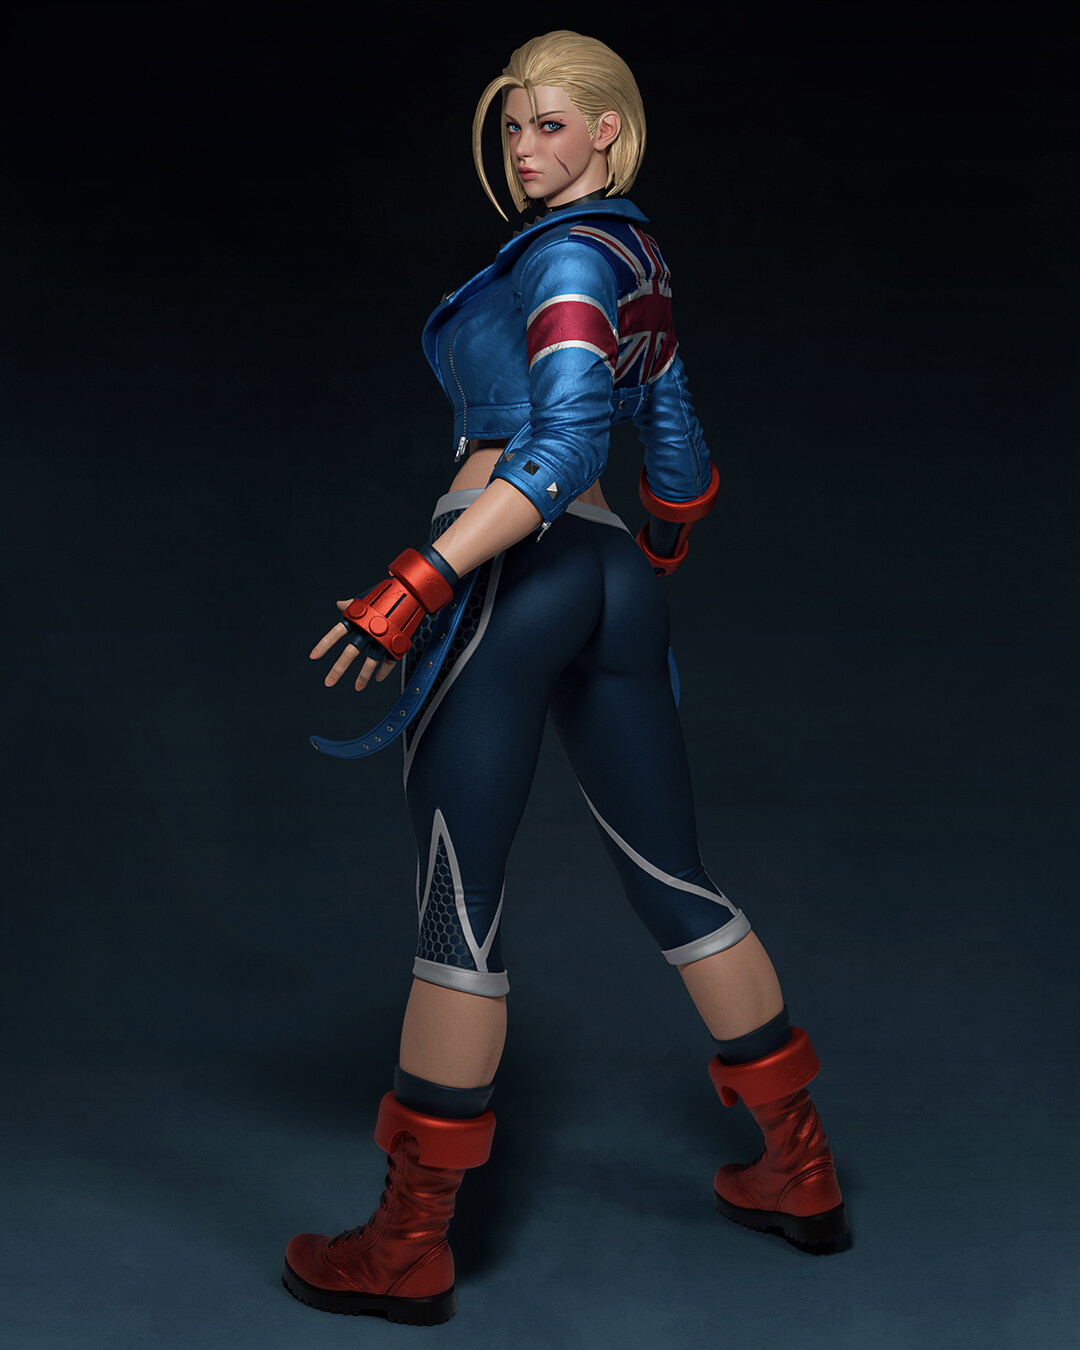 Capcom shows off unused Cammy designs for Street Fighter 6 that